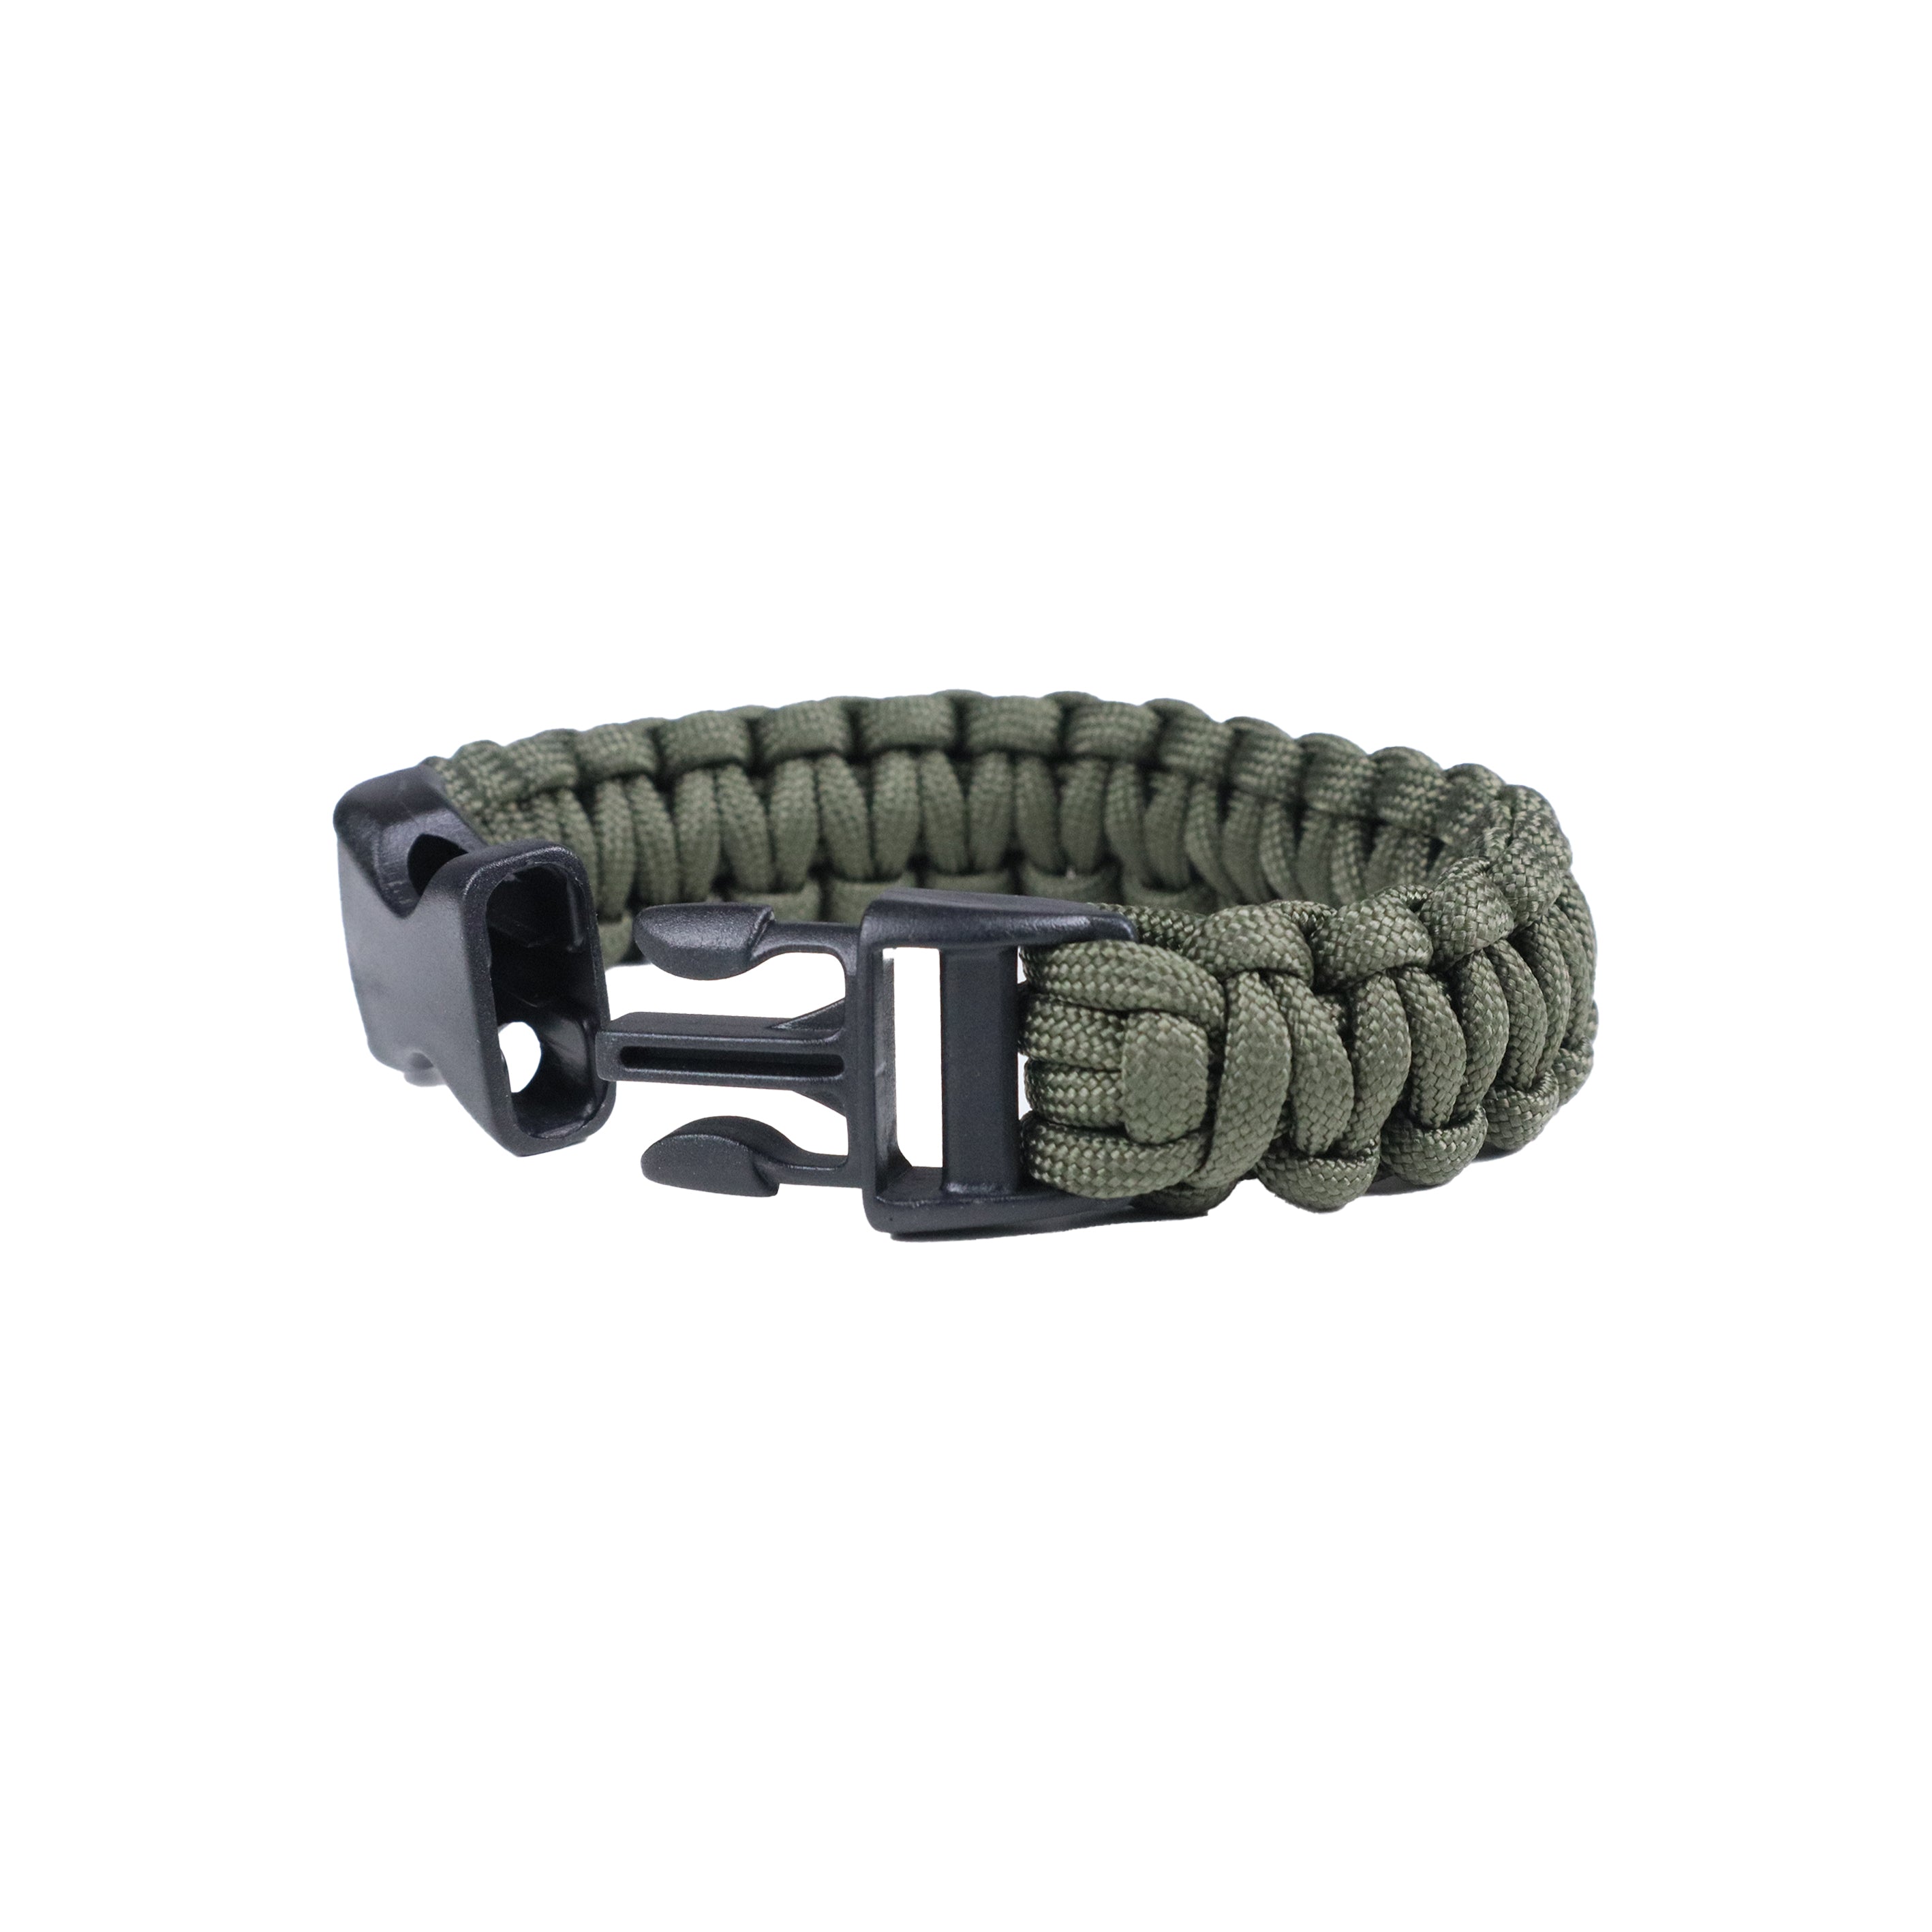 Army Paracord bracelet, Original ZLC. Worldwide delivery, Fast & Secure.